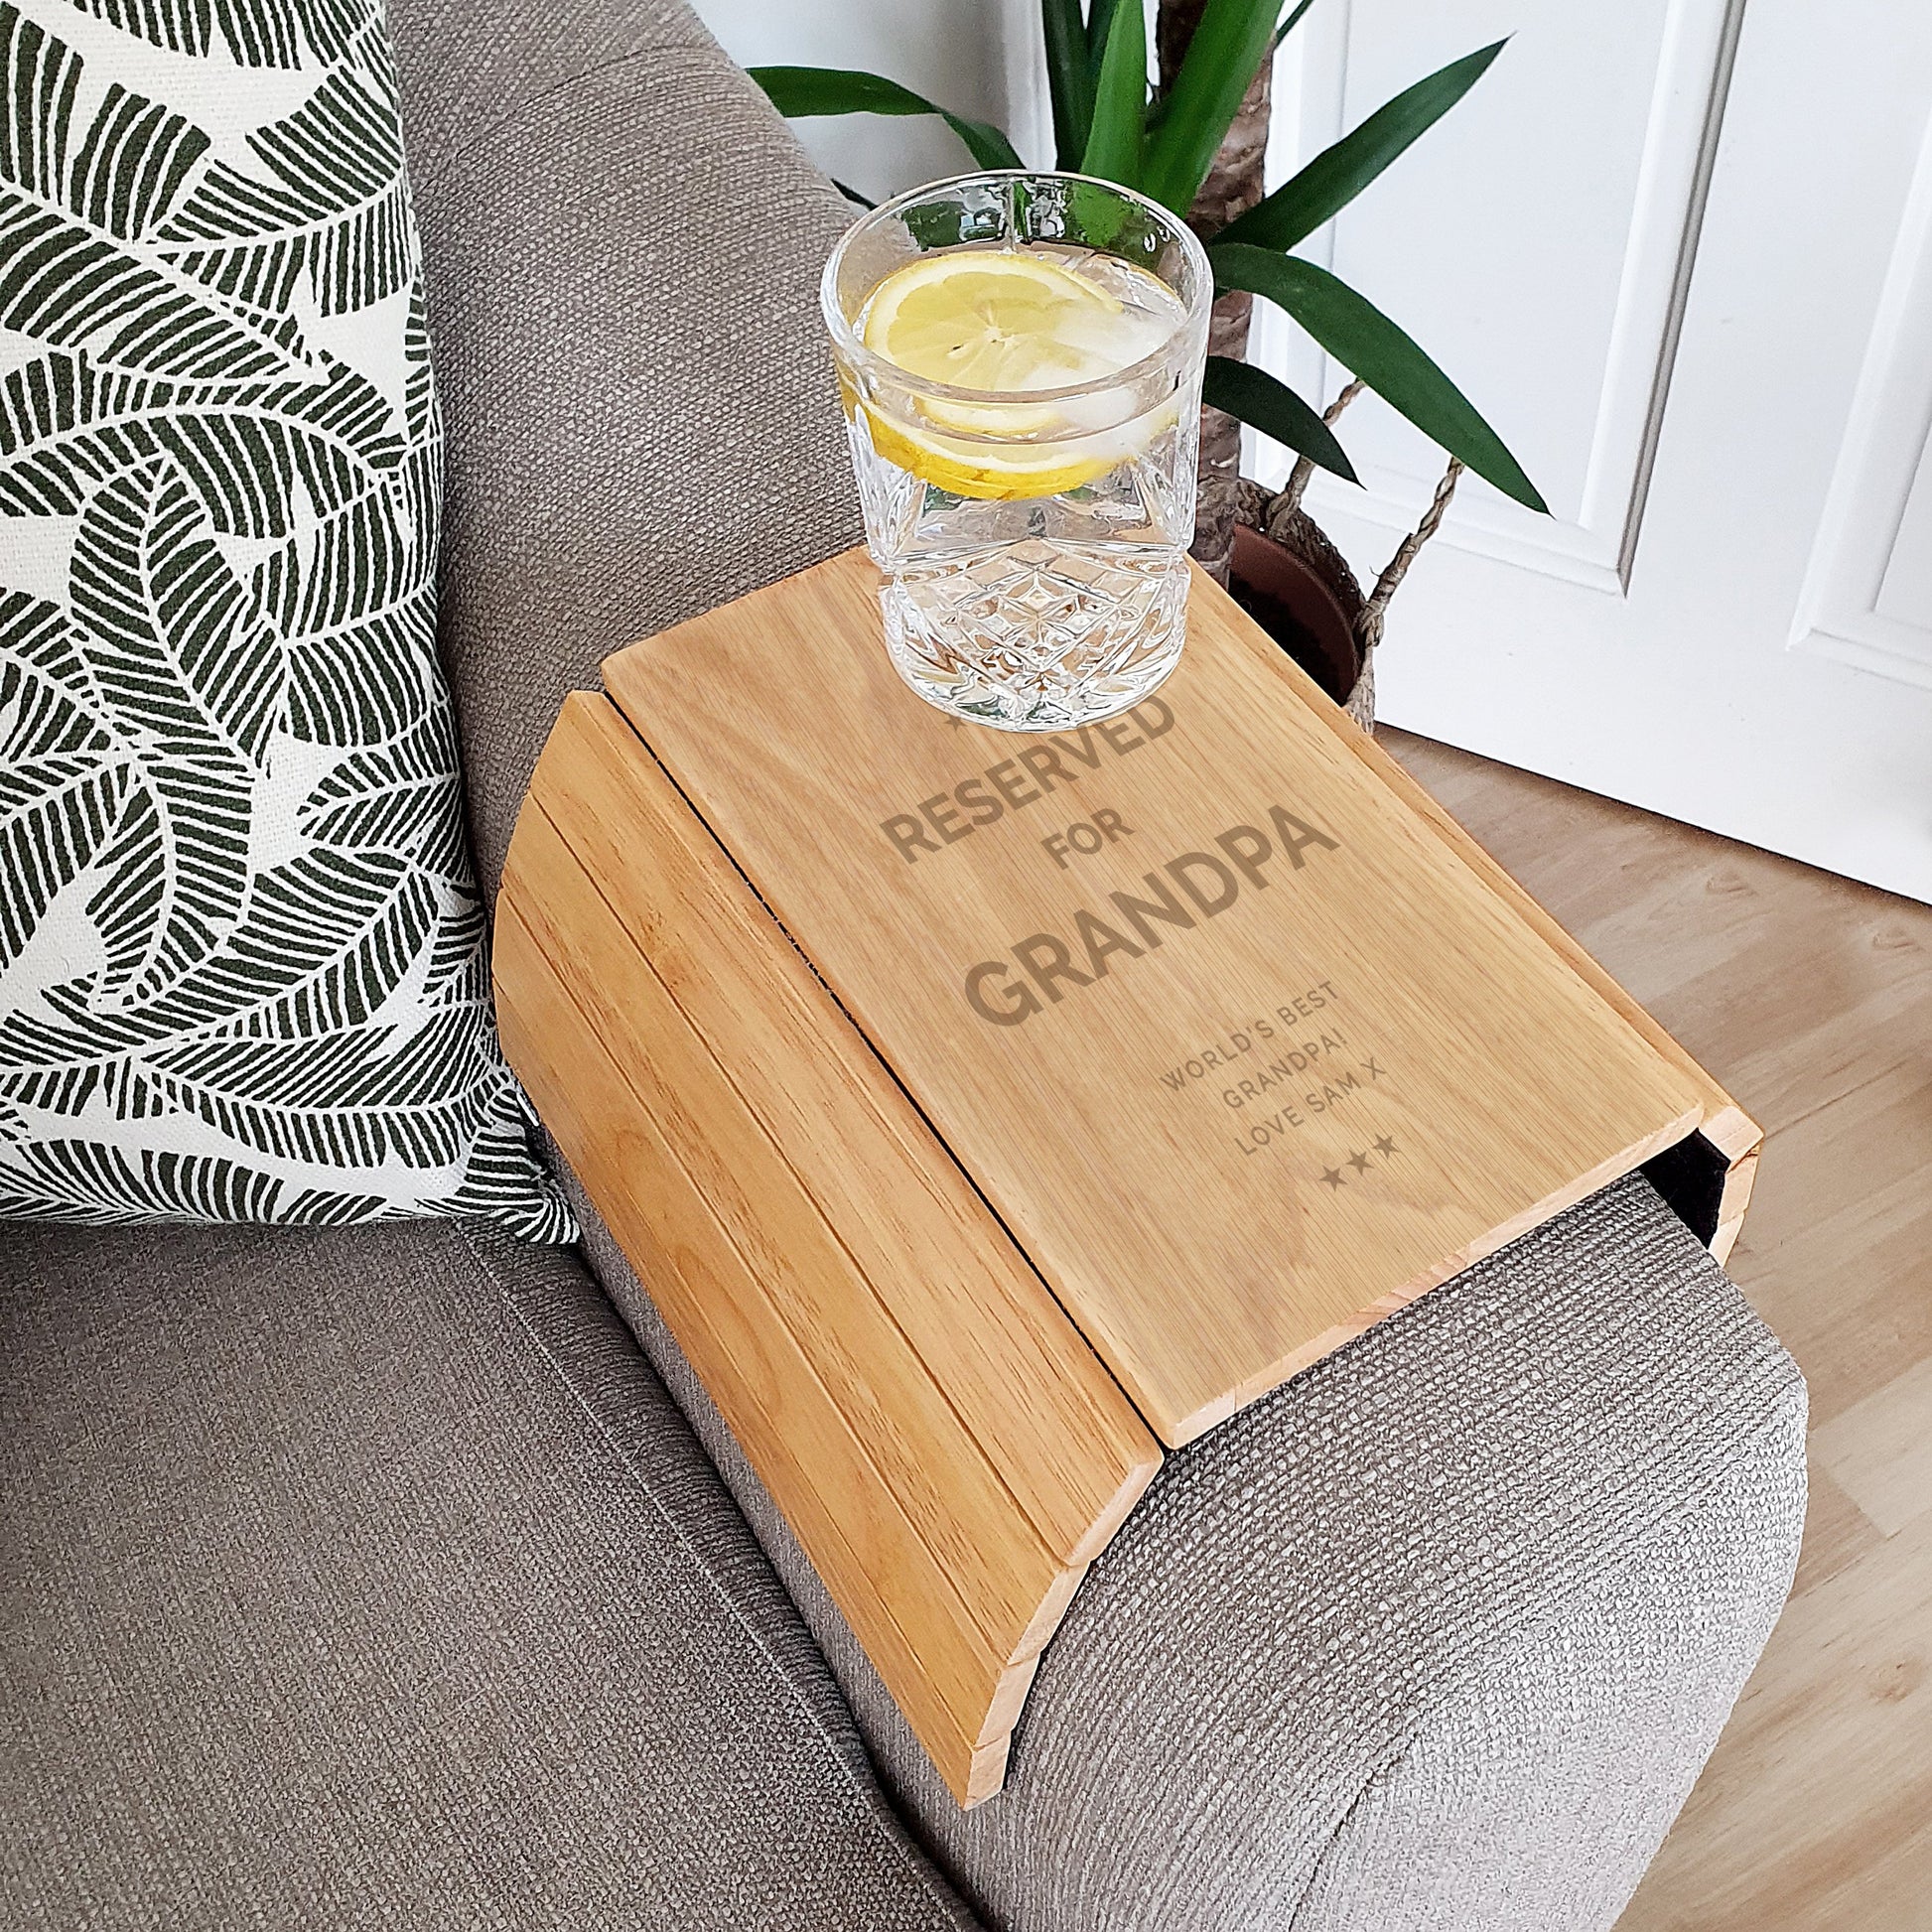 Personalised wooden sofa tray reserved for Grandpa By Sweetlea Gifts